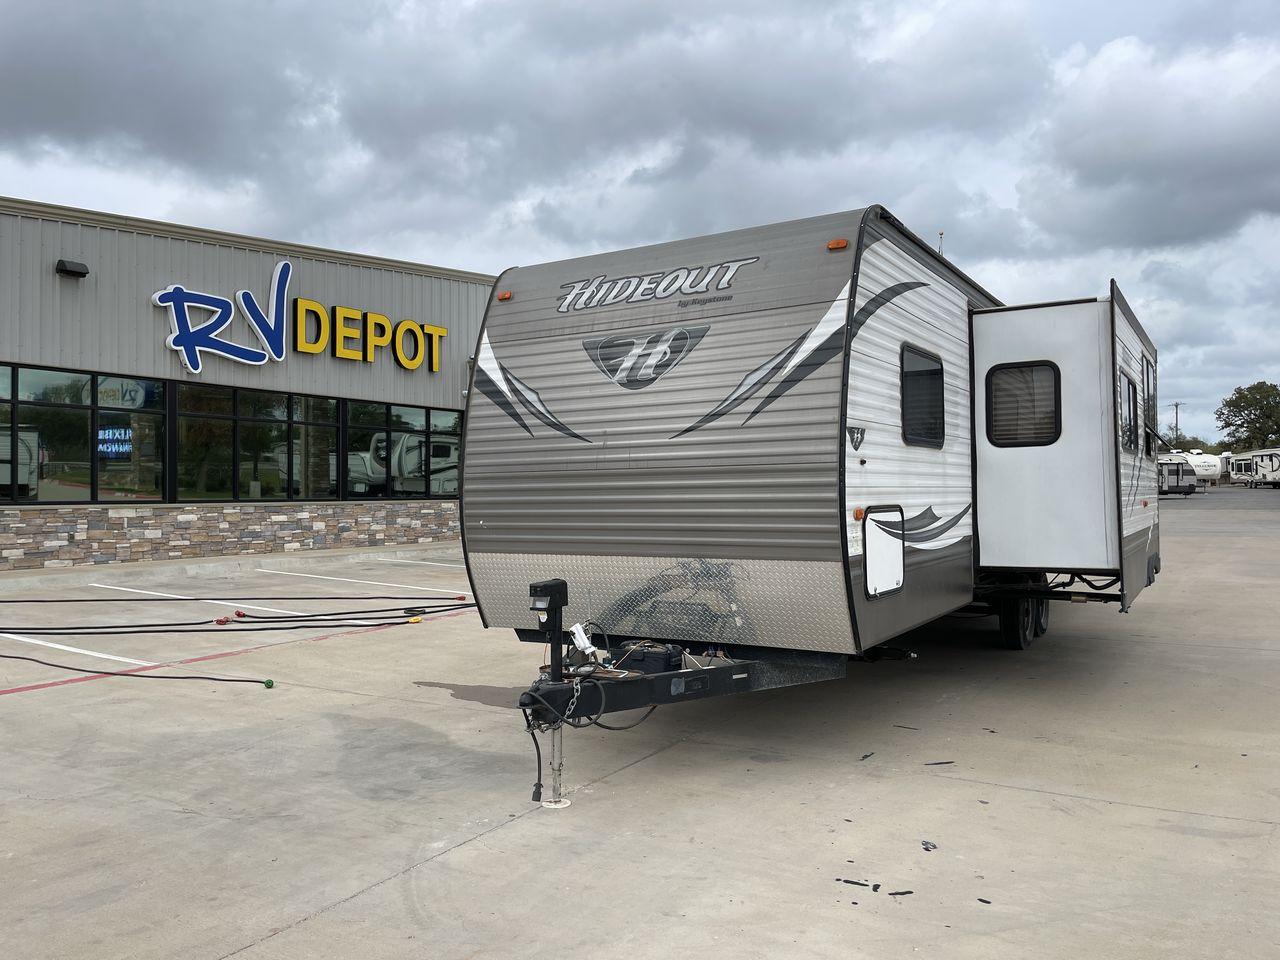 2015 KEYSTONE HIDEOUT 29BHS (4YDT29B23F7) , Length: 34.25 ft. | Dry Weight: 7,225 lbs. | Gross Weight: 9,675 lbs. | Slides: 1 transmission, located at 4319 N Main St, Cleburne, TX, 76033, (817) 678-5133, 32.385960, -97.391212 - Photo #1